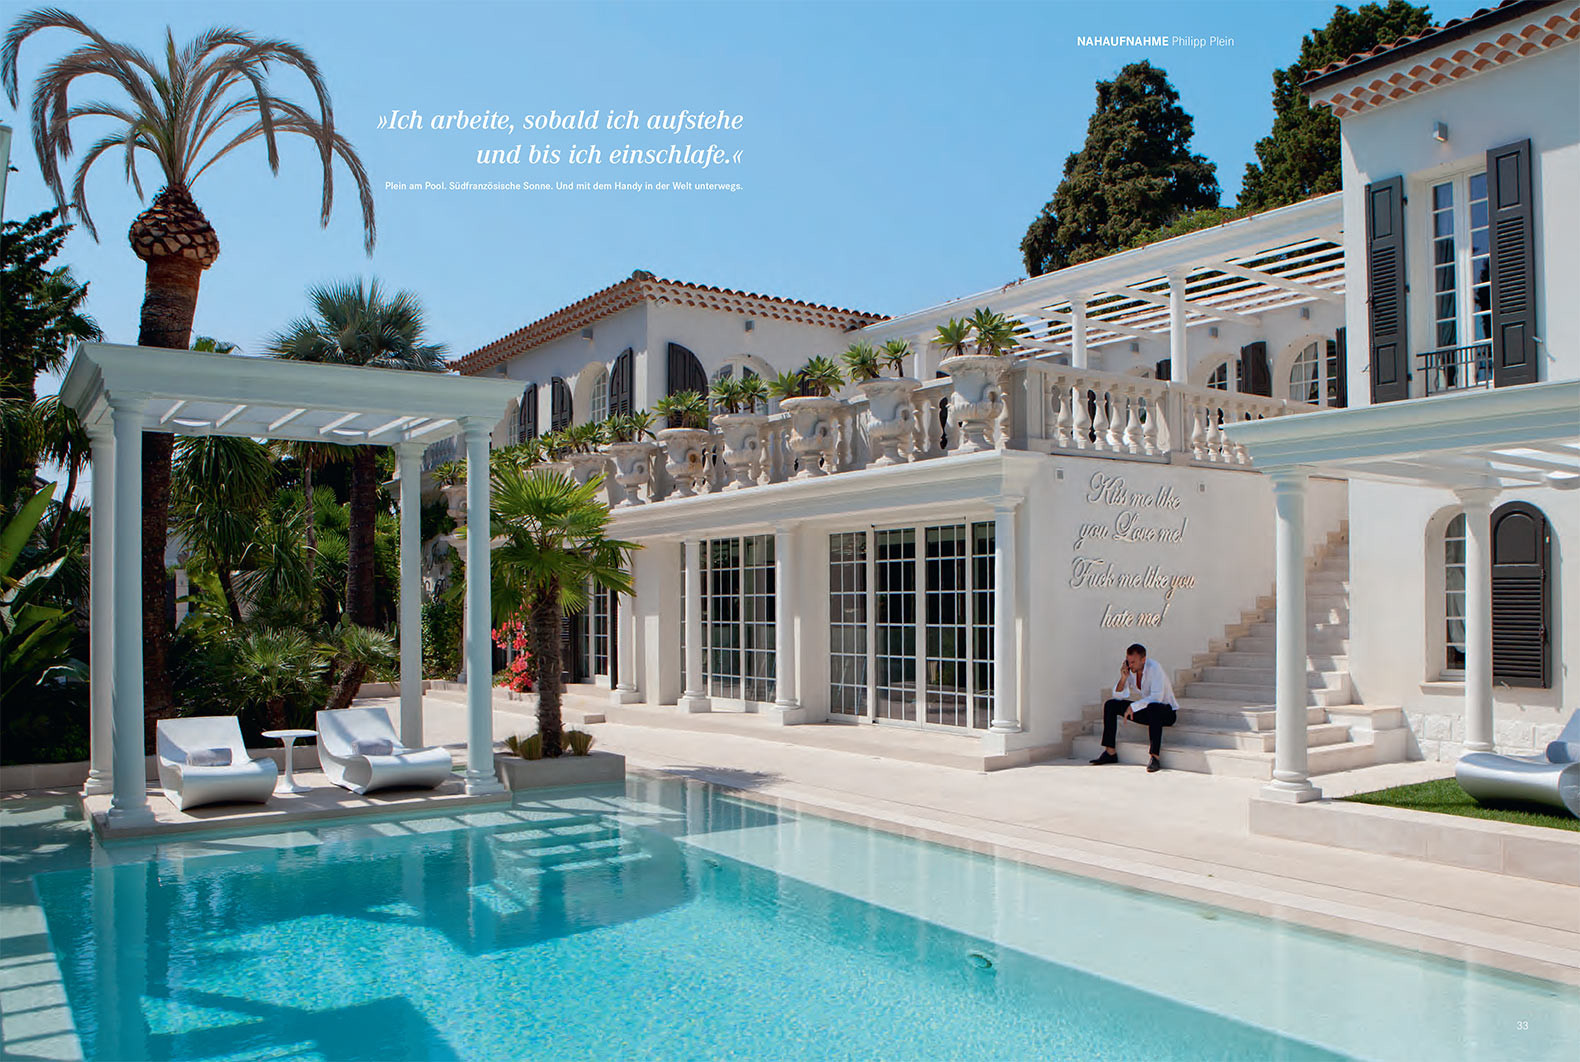 Tearsheet of page layout of Handelsblatt magazine showing double page photograph of fashion designer Philipp Plein on the terrace of his villa